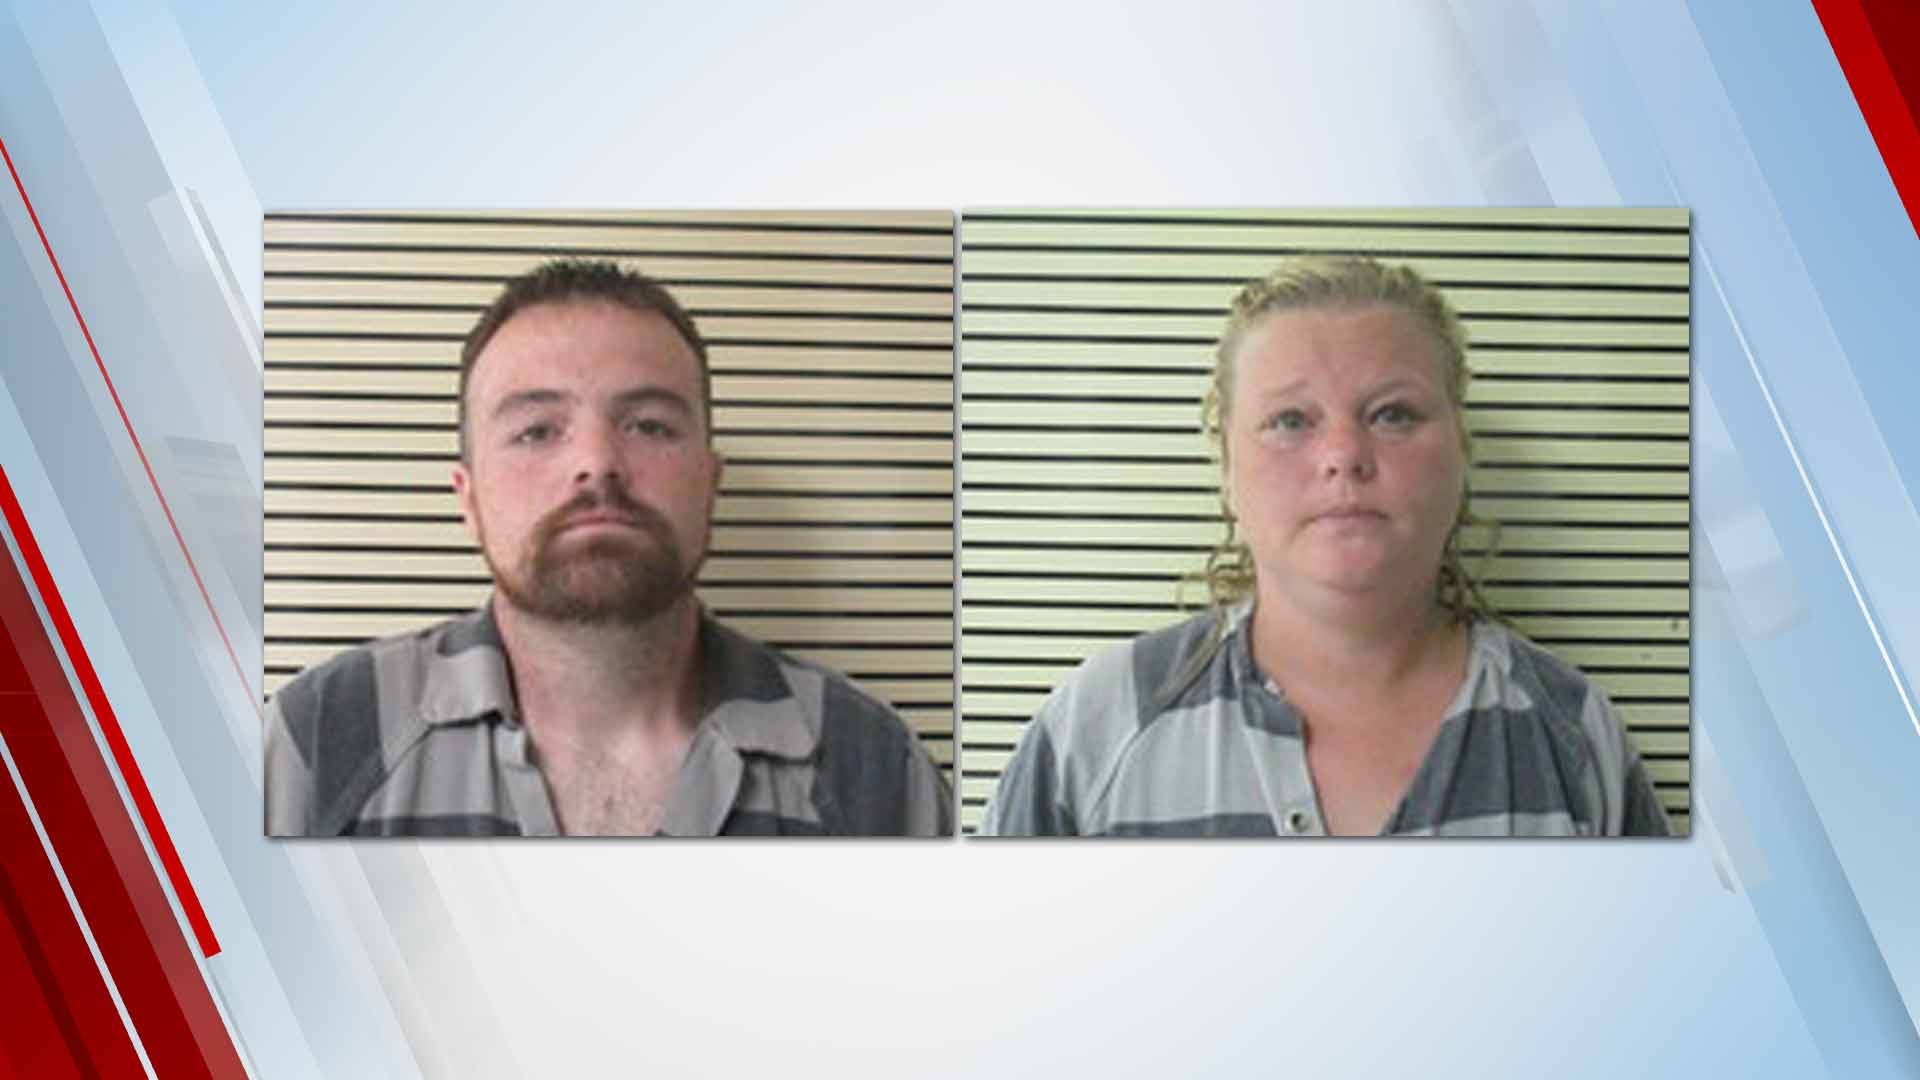 UPDATE: Wagoner Parents Charged With Murder In Drowning Death Of Their 4-Year-Old Son